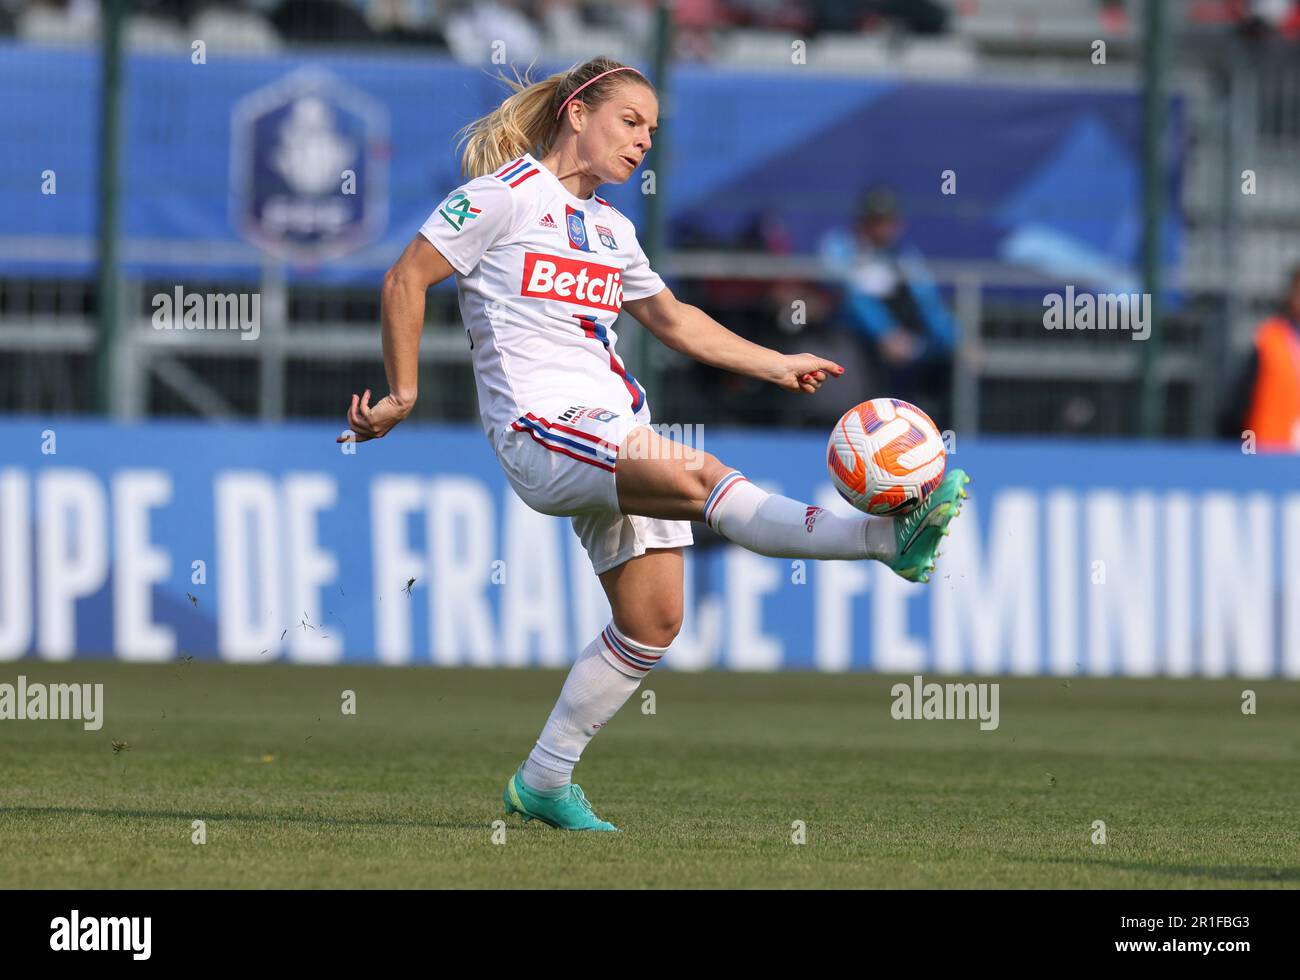 Orleans, France. 13th May, 2023. OL's Eugenie Le Sommer competes during the final of the 2022-2023 Women's French cup between Paris Saint-Germain and Olympique Lyonnais (OL) in Orleans, France, May 13, 2023. Credit: Gao Jing/Xinhua/Alamy Live News Stock Photo